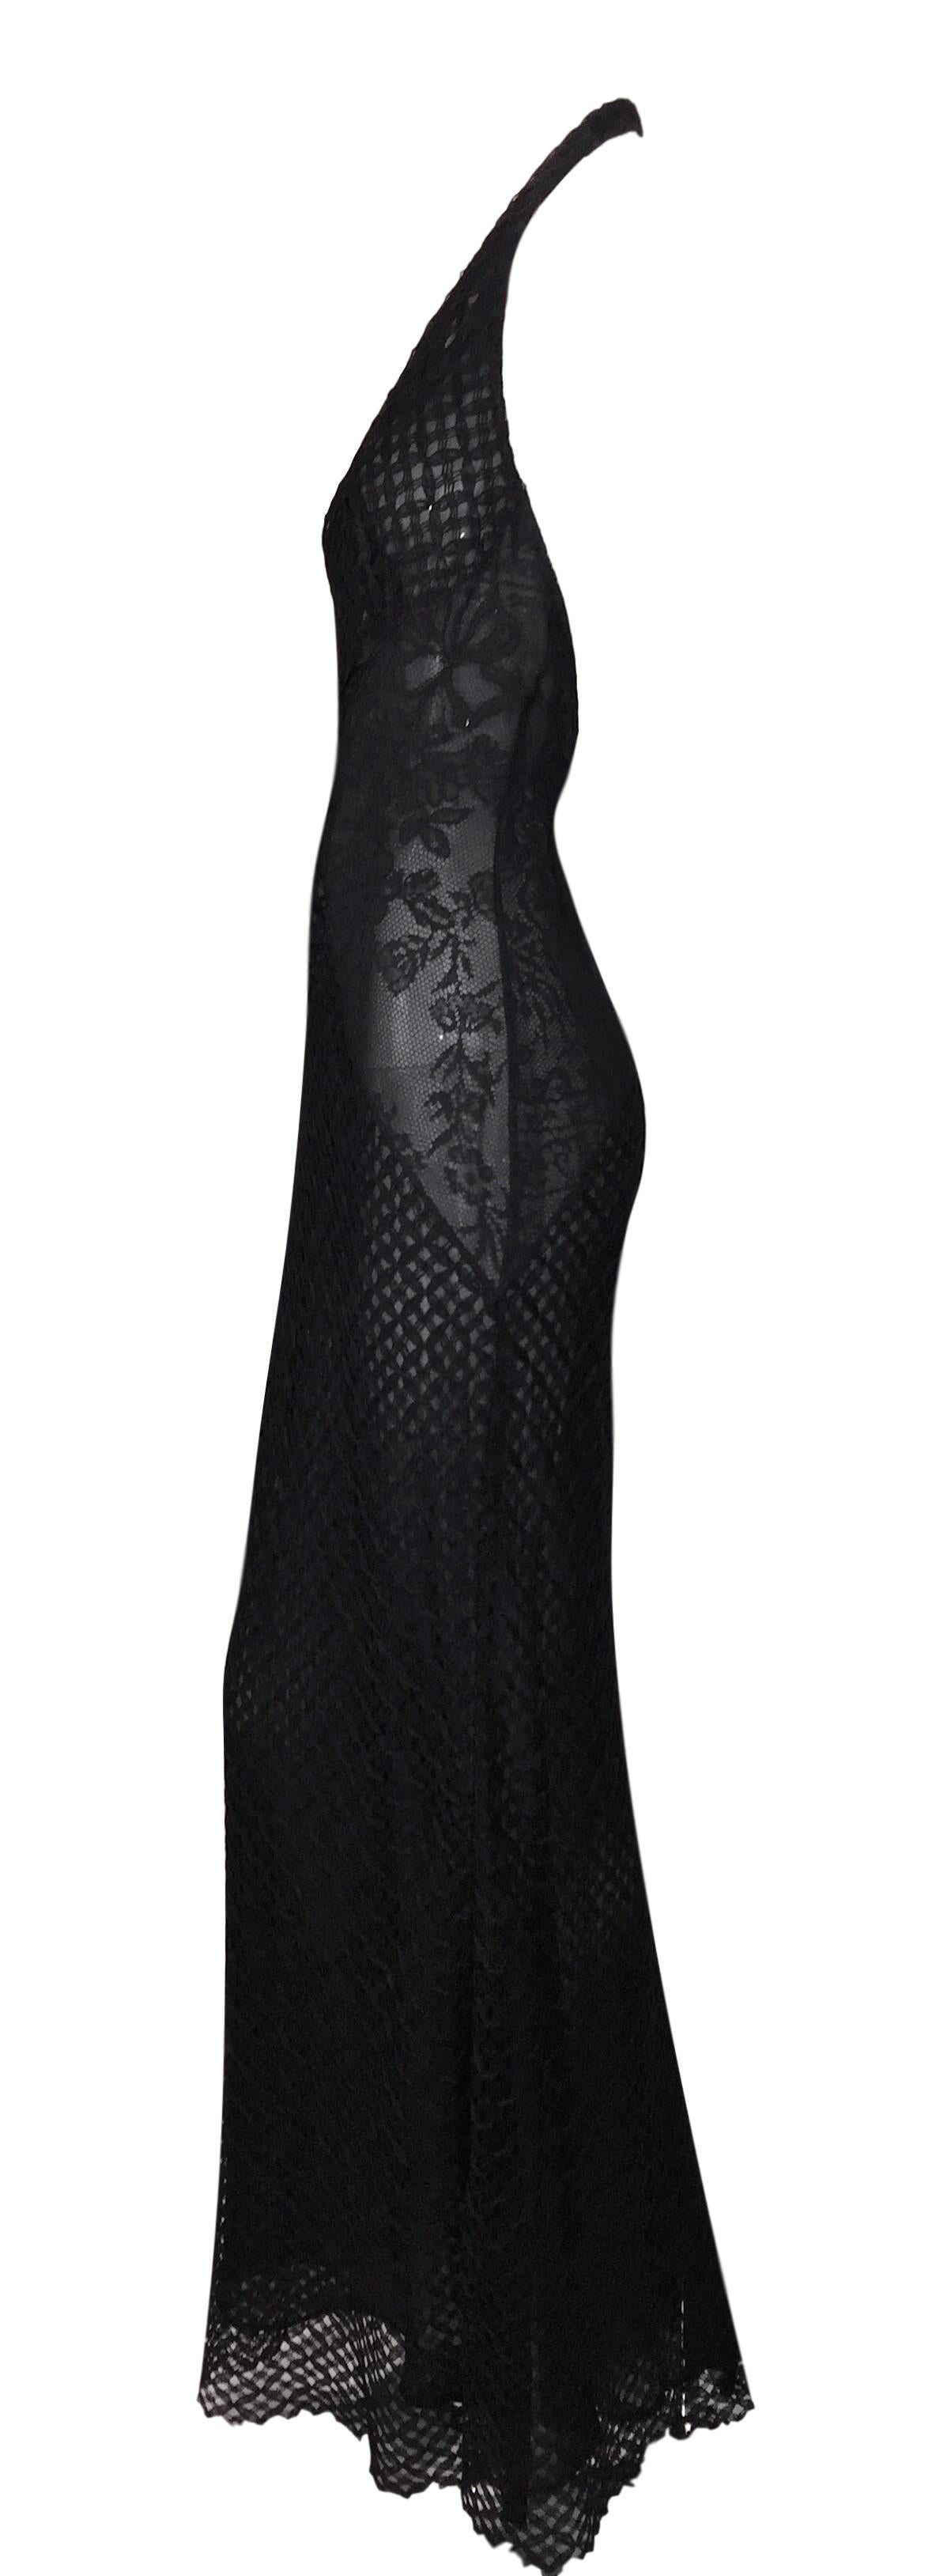 S/S 2002 Gianni Versace Sheer Black Lace Plunging Backless Halter Gown Dress 40 In Good Condition In Yukon, OK